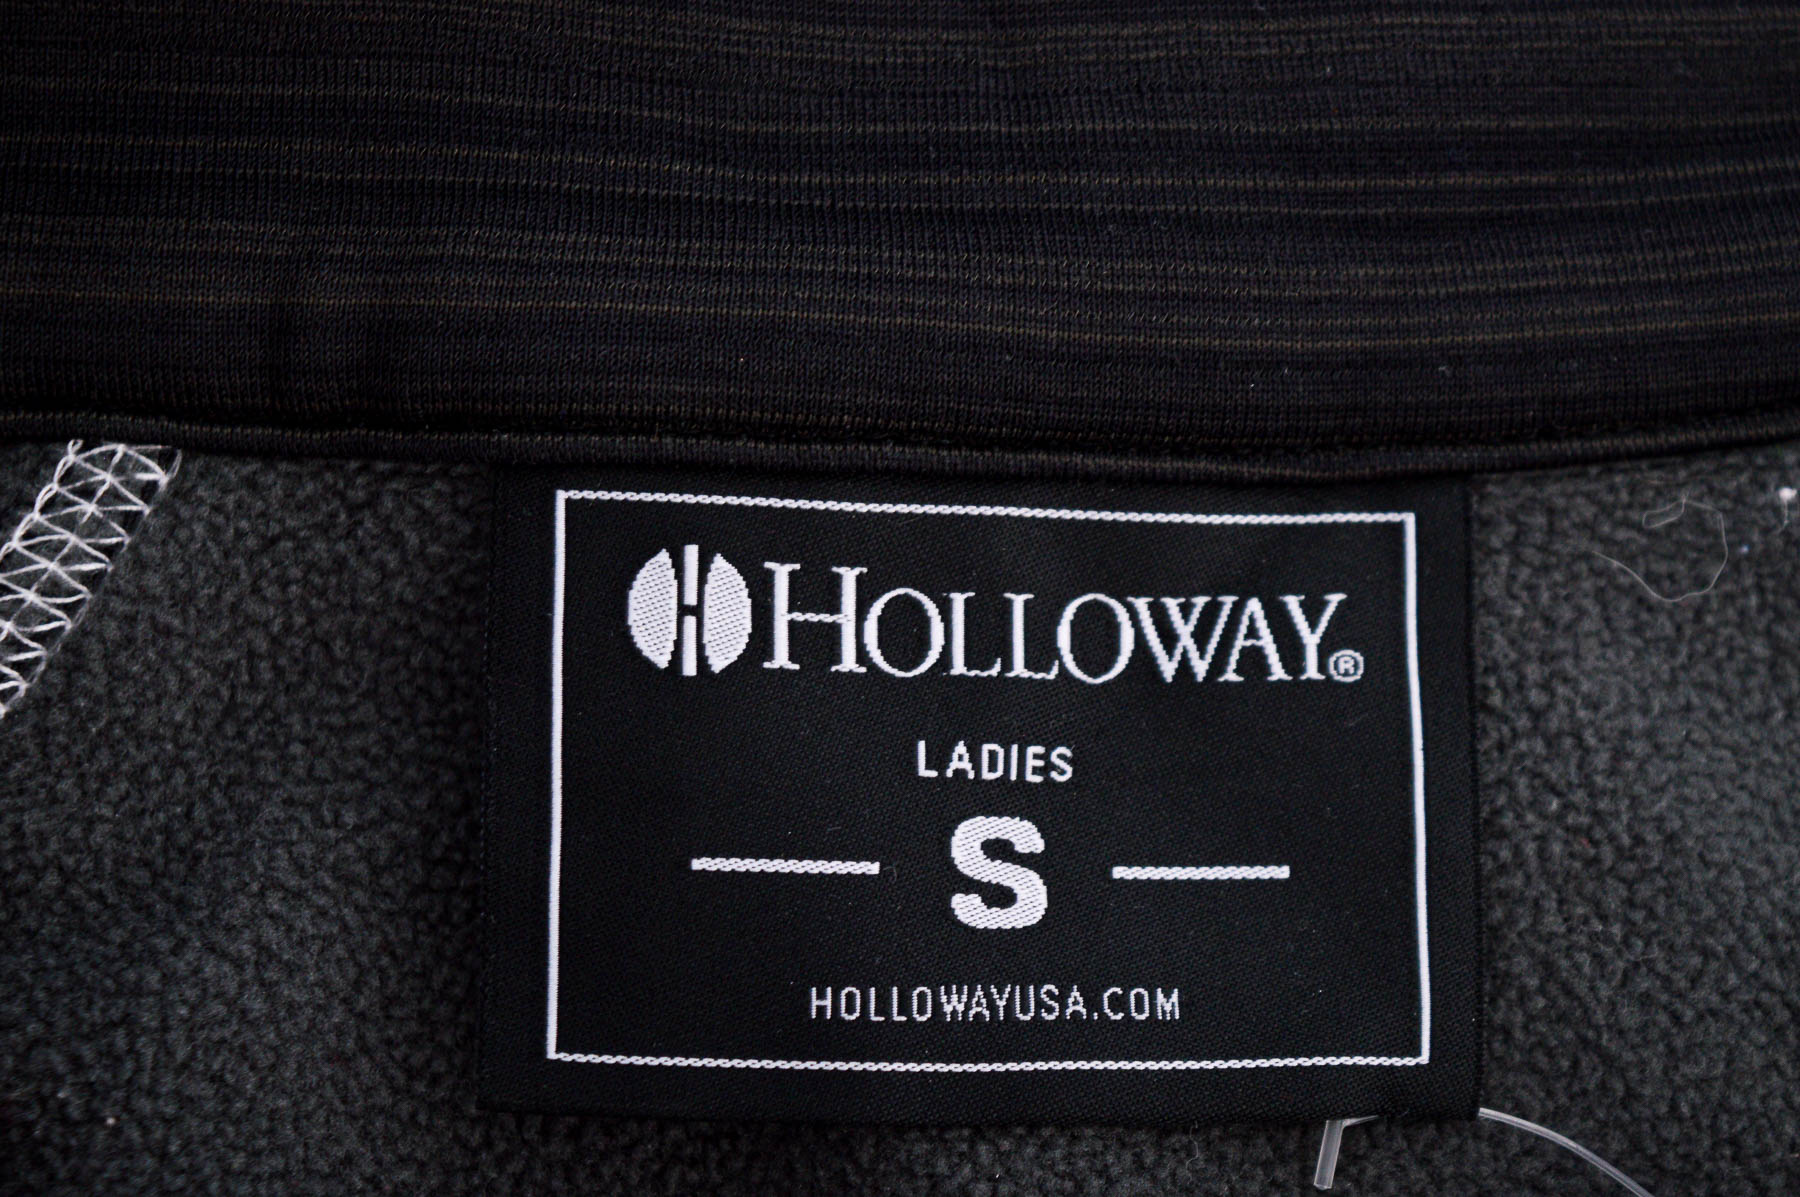 Female sports top  - Holloway - 2